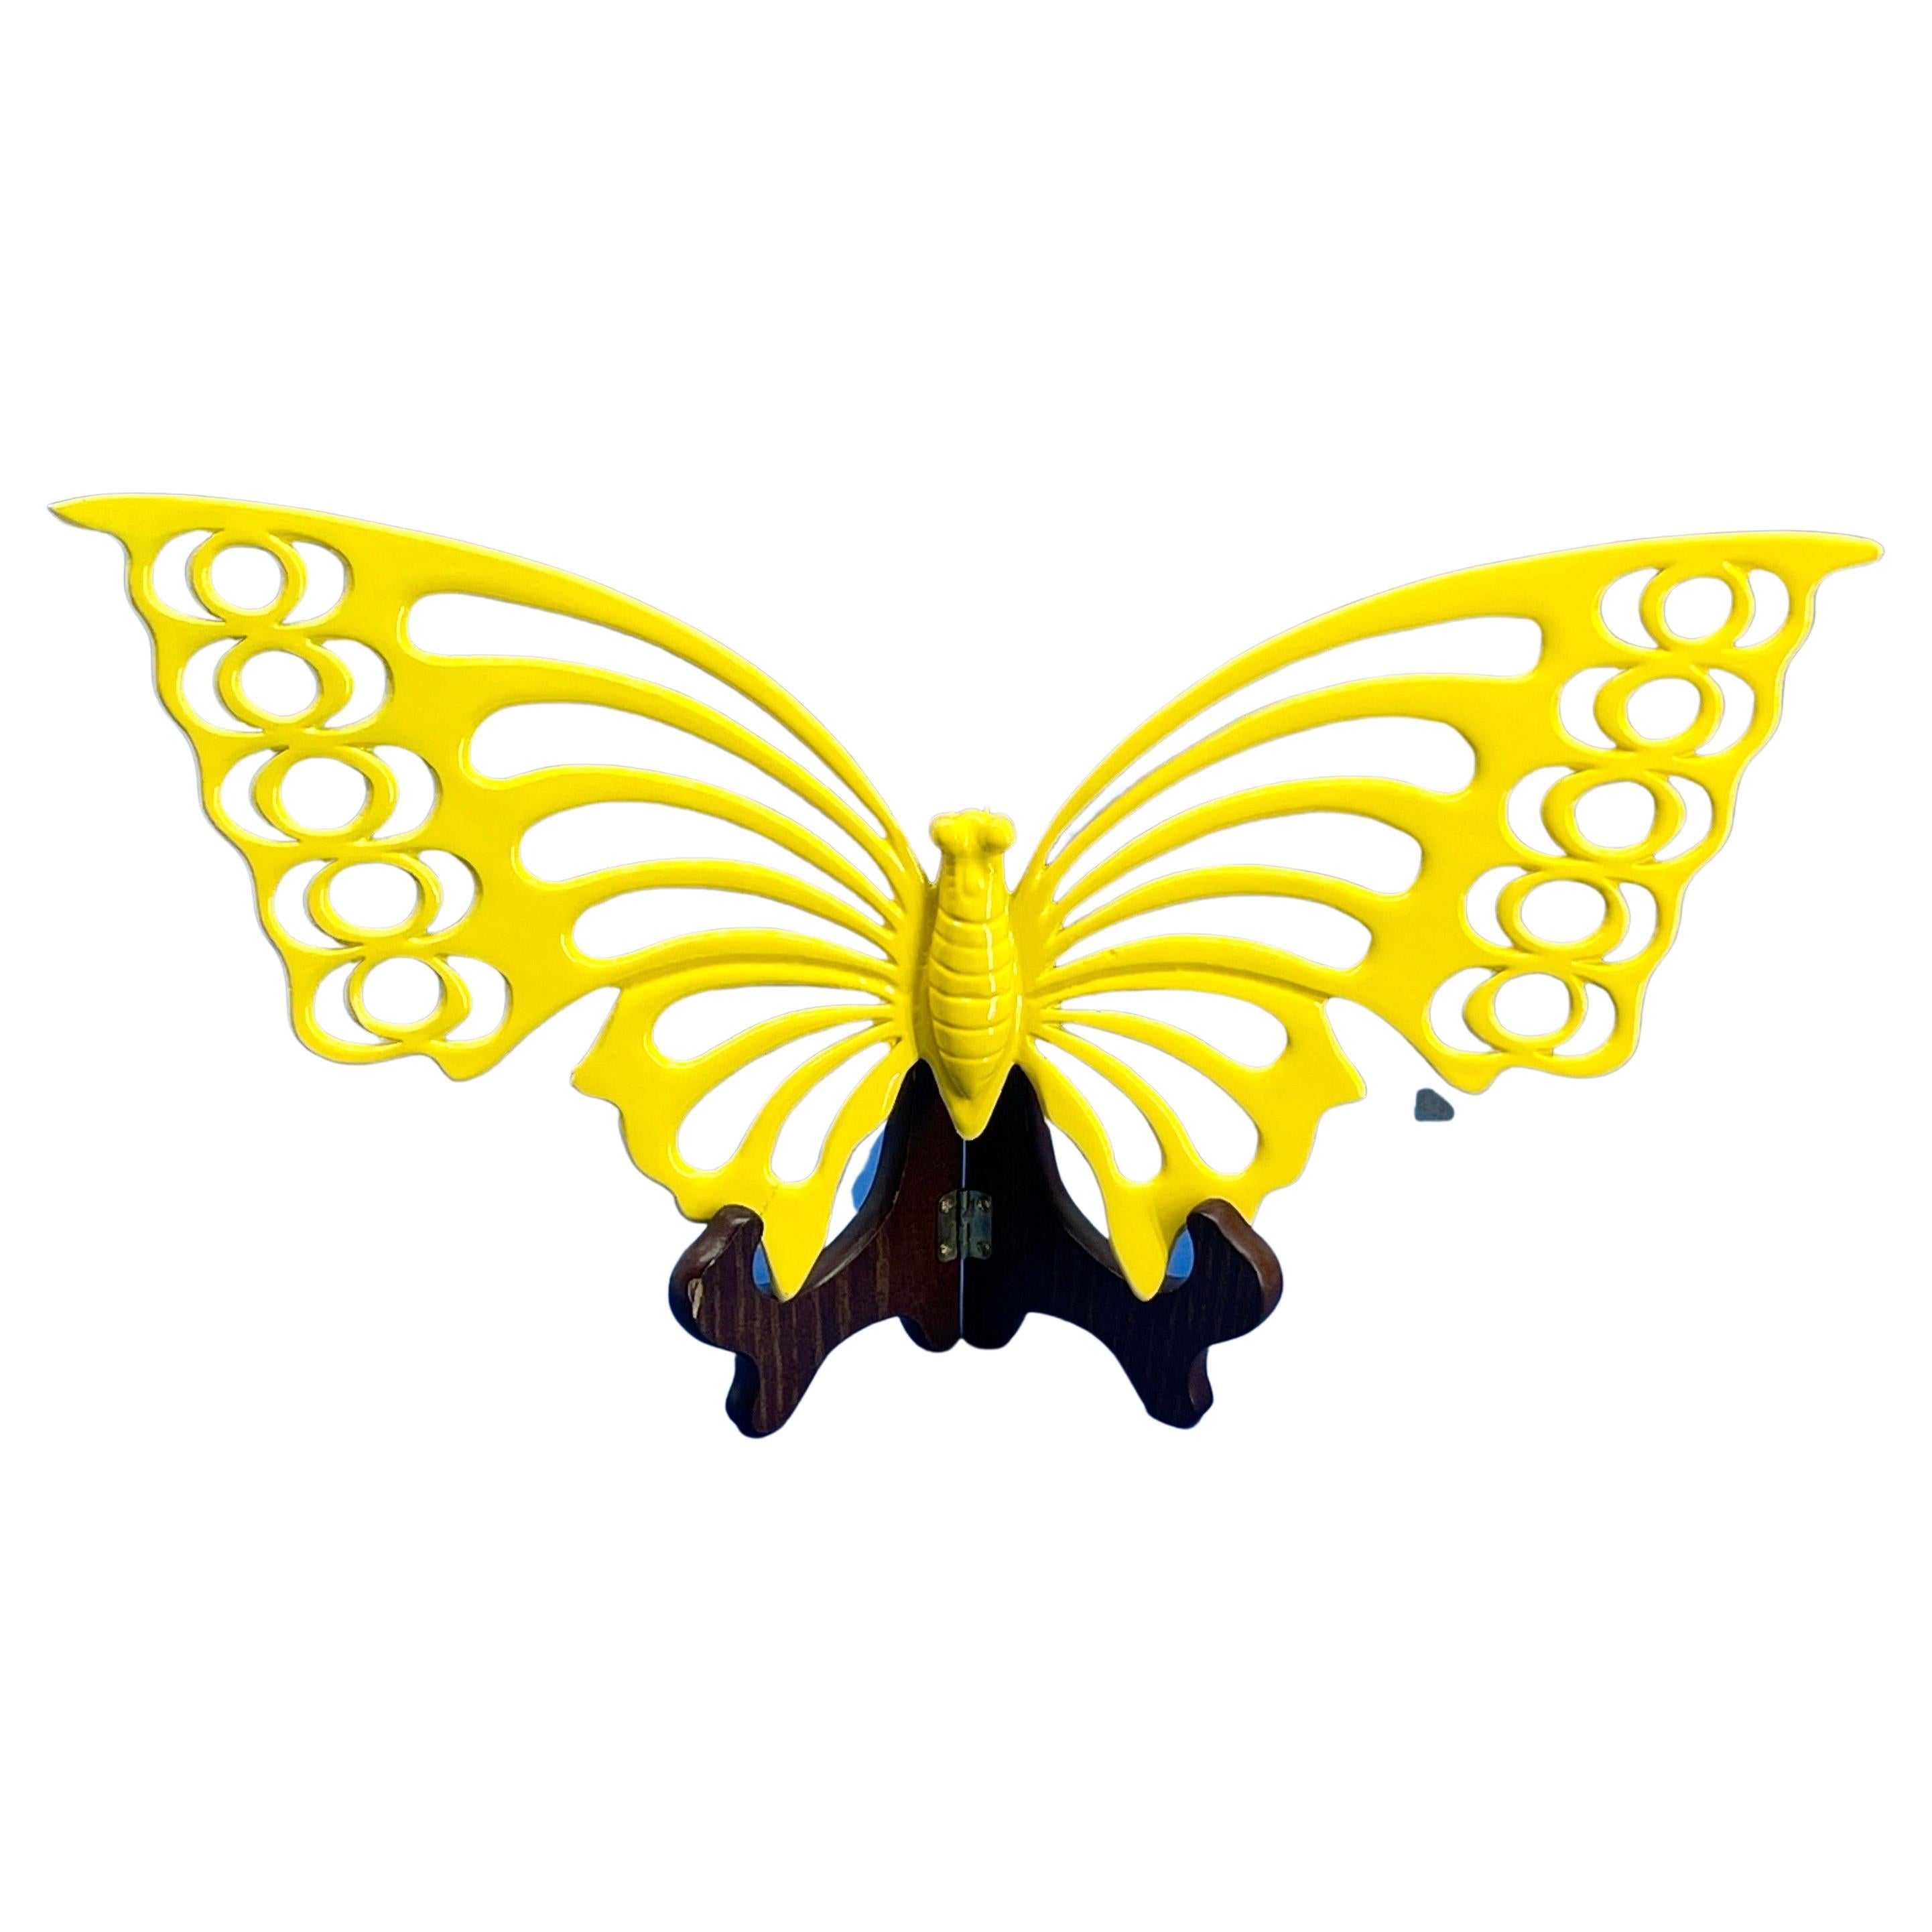 Large Butterfly in Powder Coated Bright Sunshine Yellow of Solid Brass Wall or Shelf Decoration, 1960s 

Unique vintage wall décor butterfly. Fantastic eye-catching statement piece on the wall alone or mixed in a grouping. Could also be a